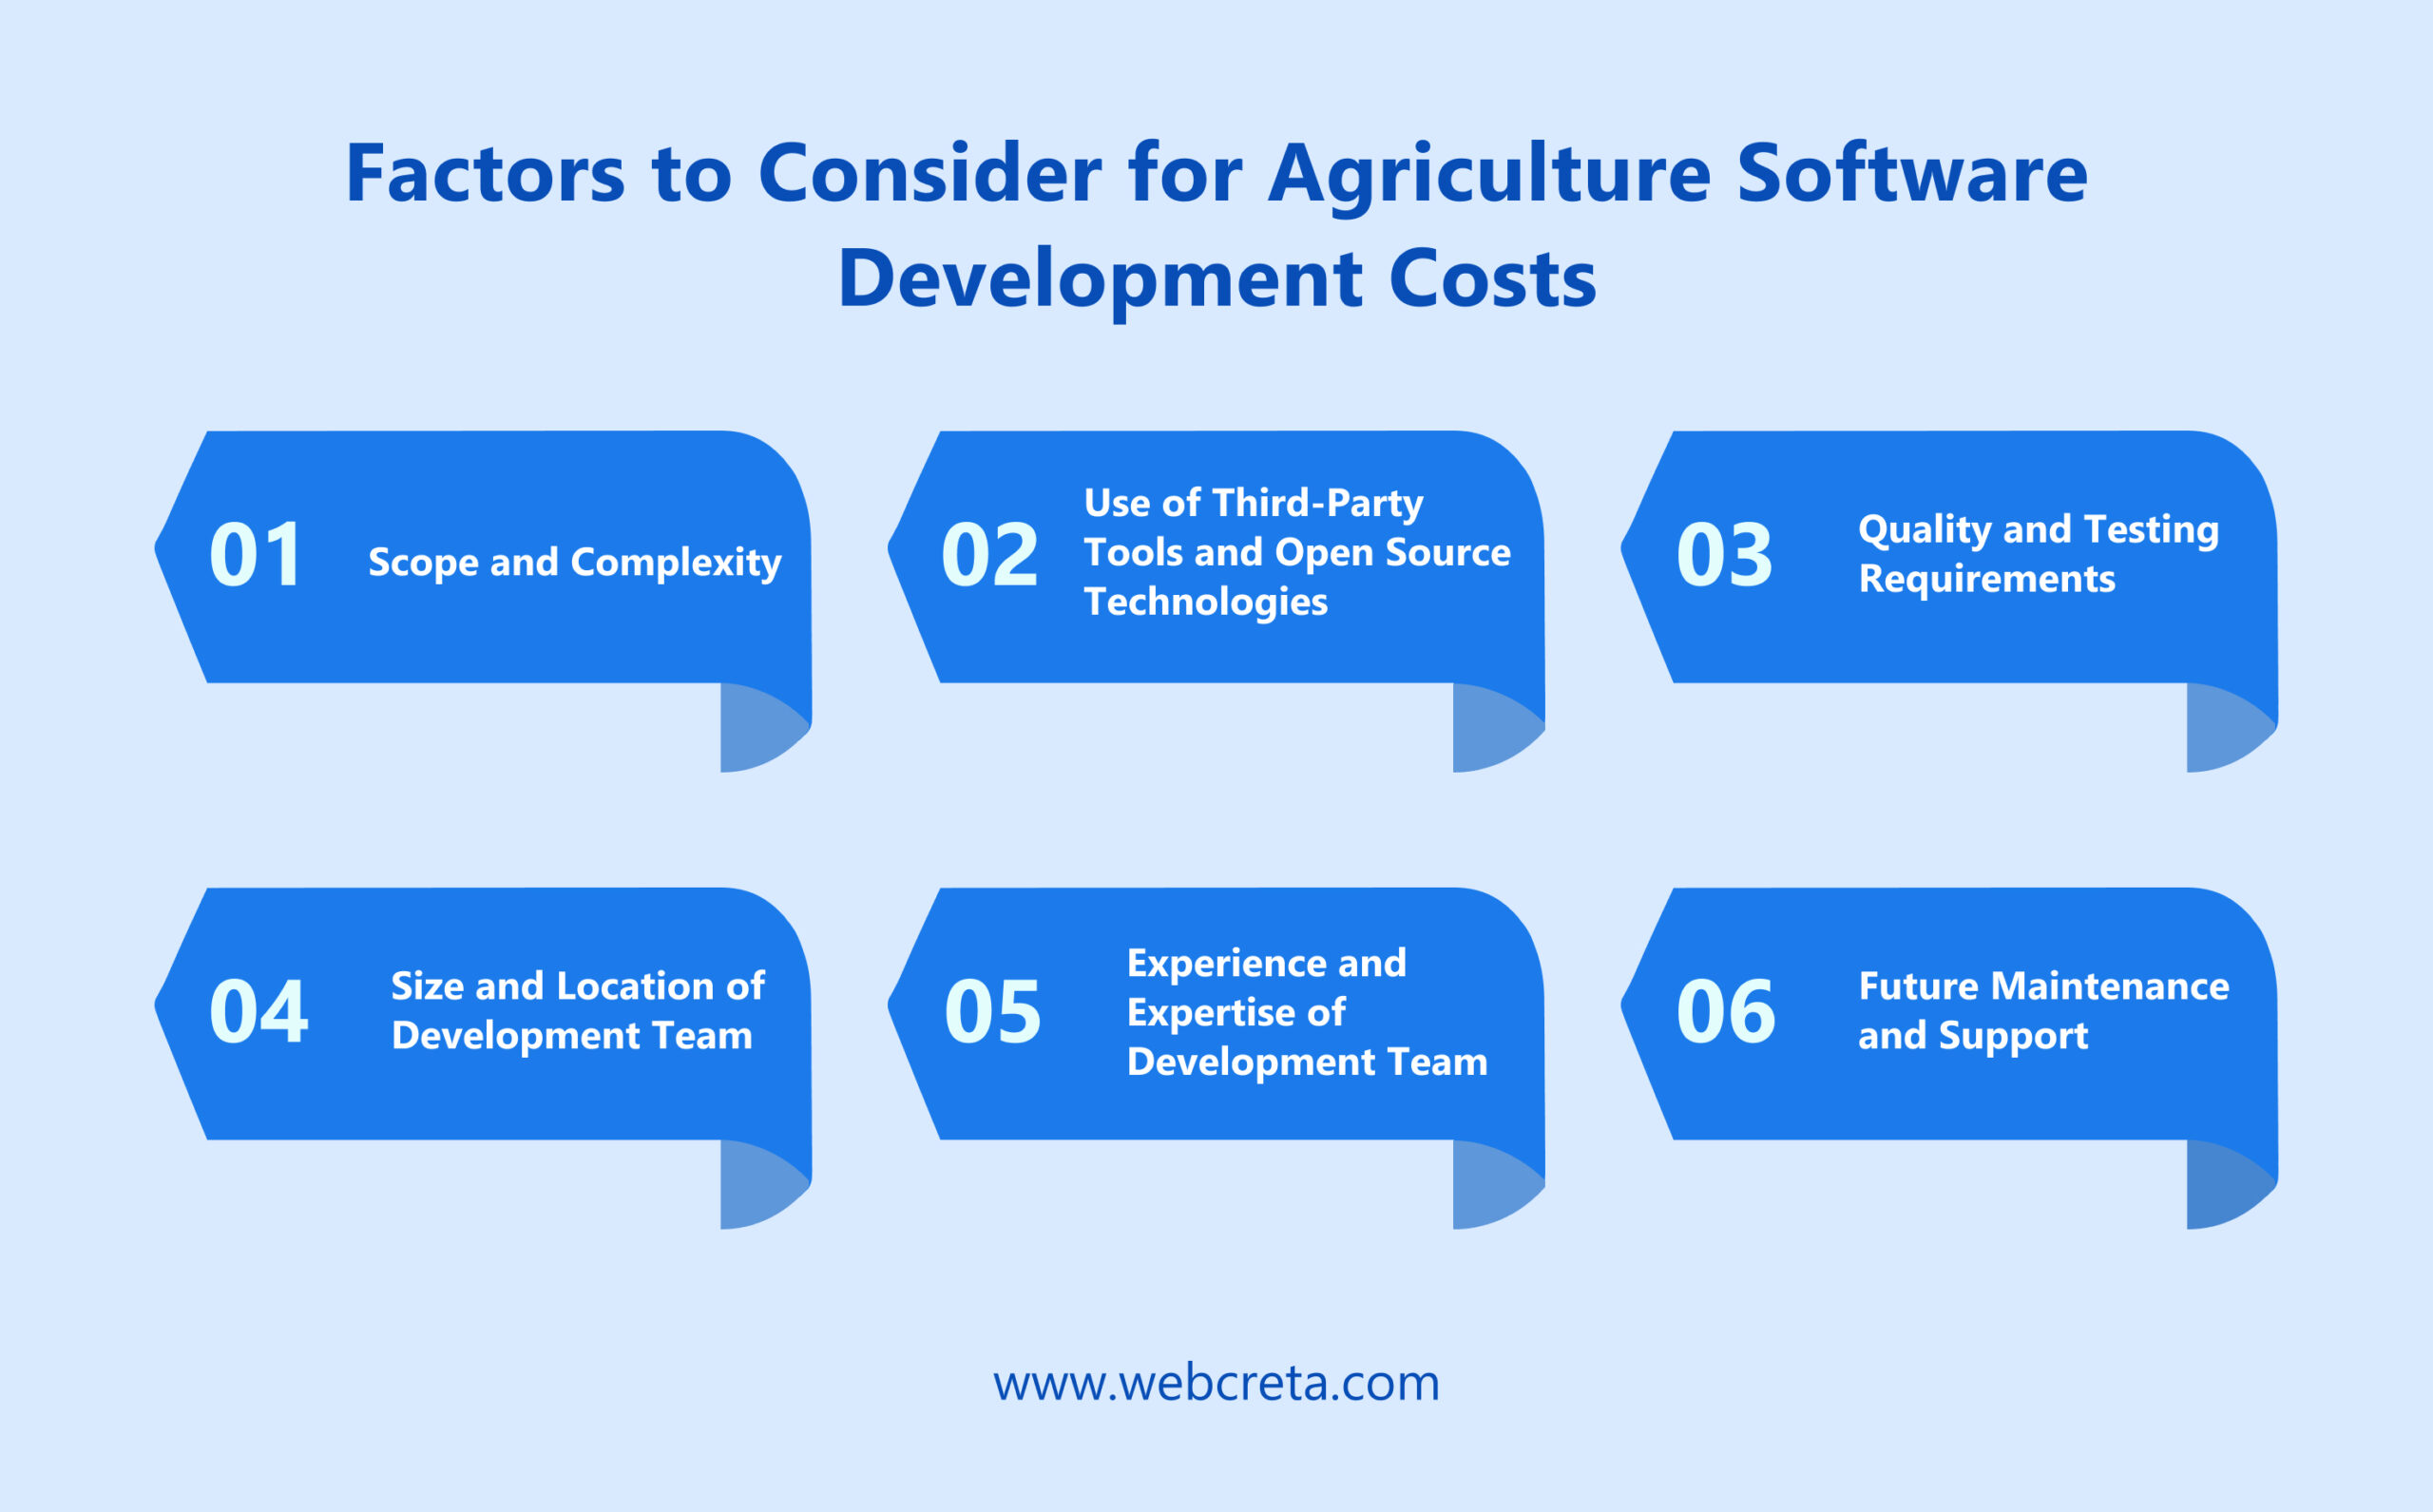 Factors to Consider for Agriculture Software Development Costs